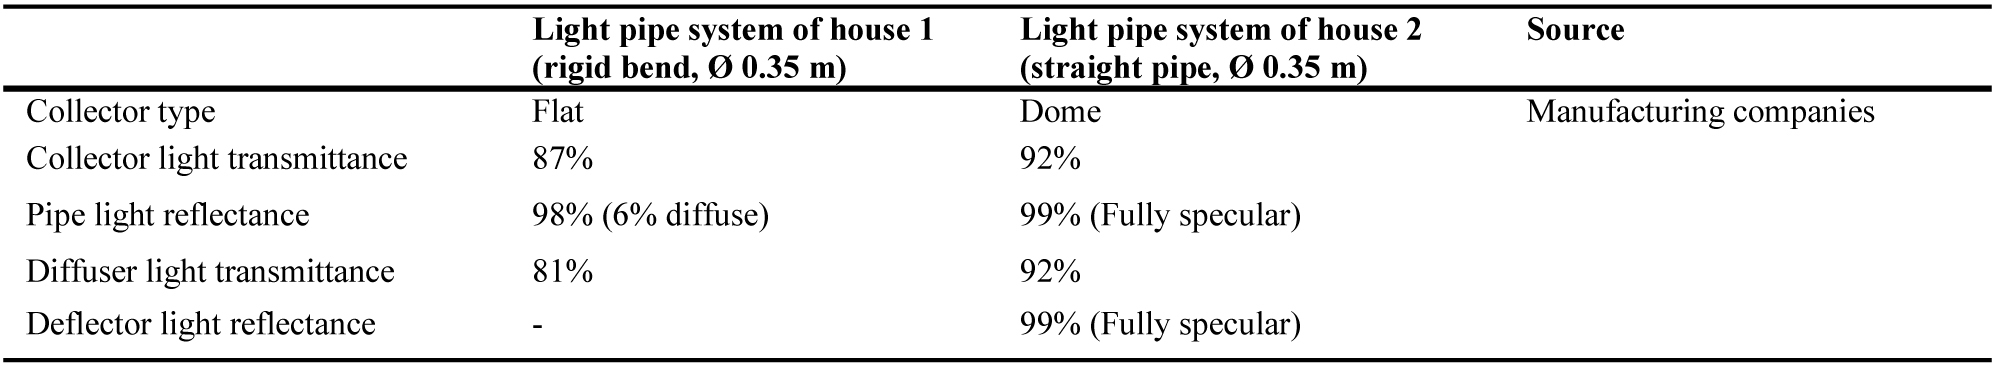 Optical properties of the light pipe models.